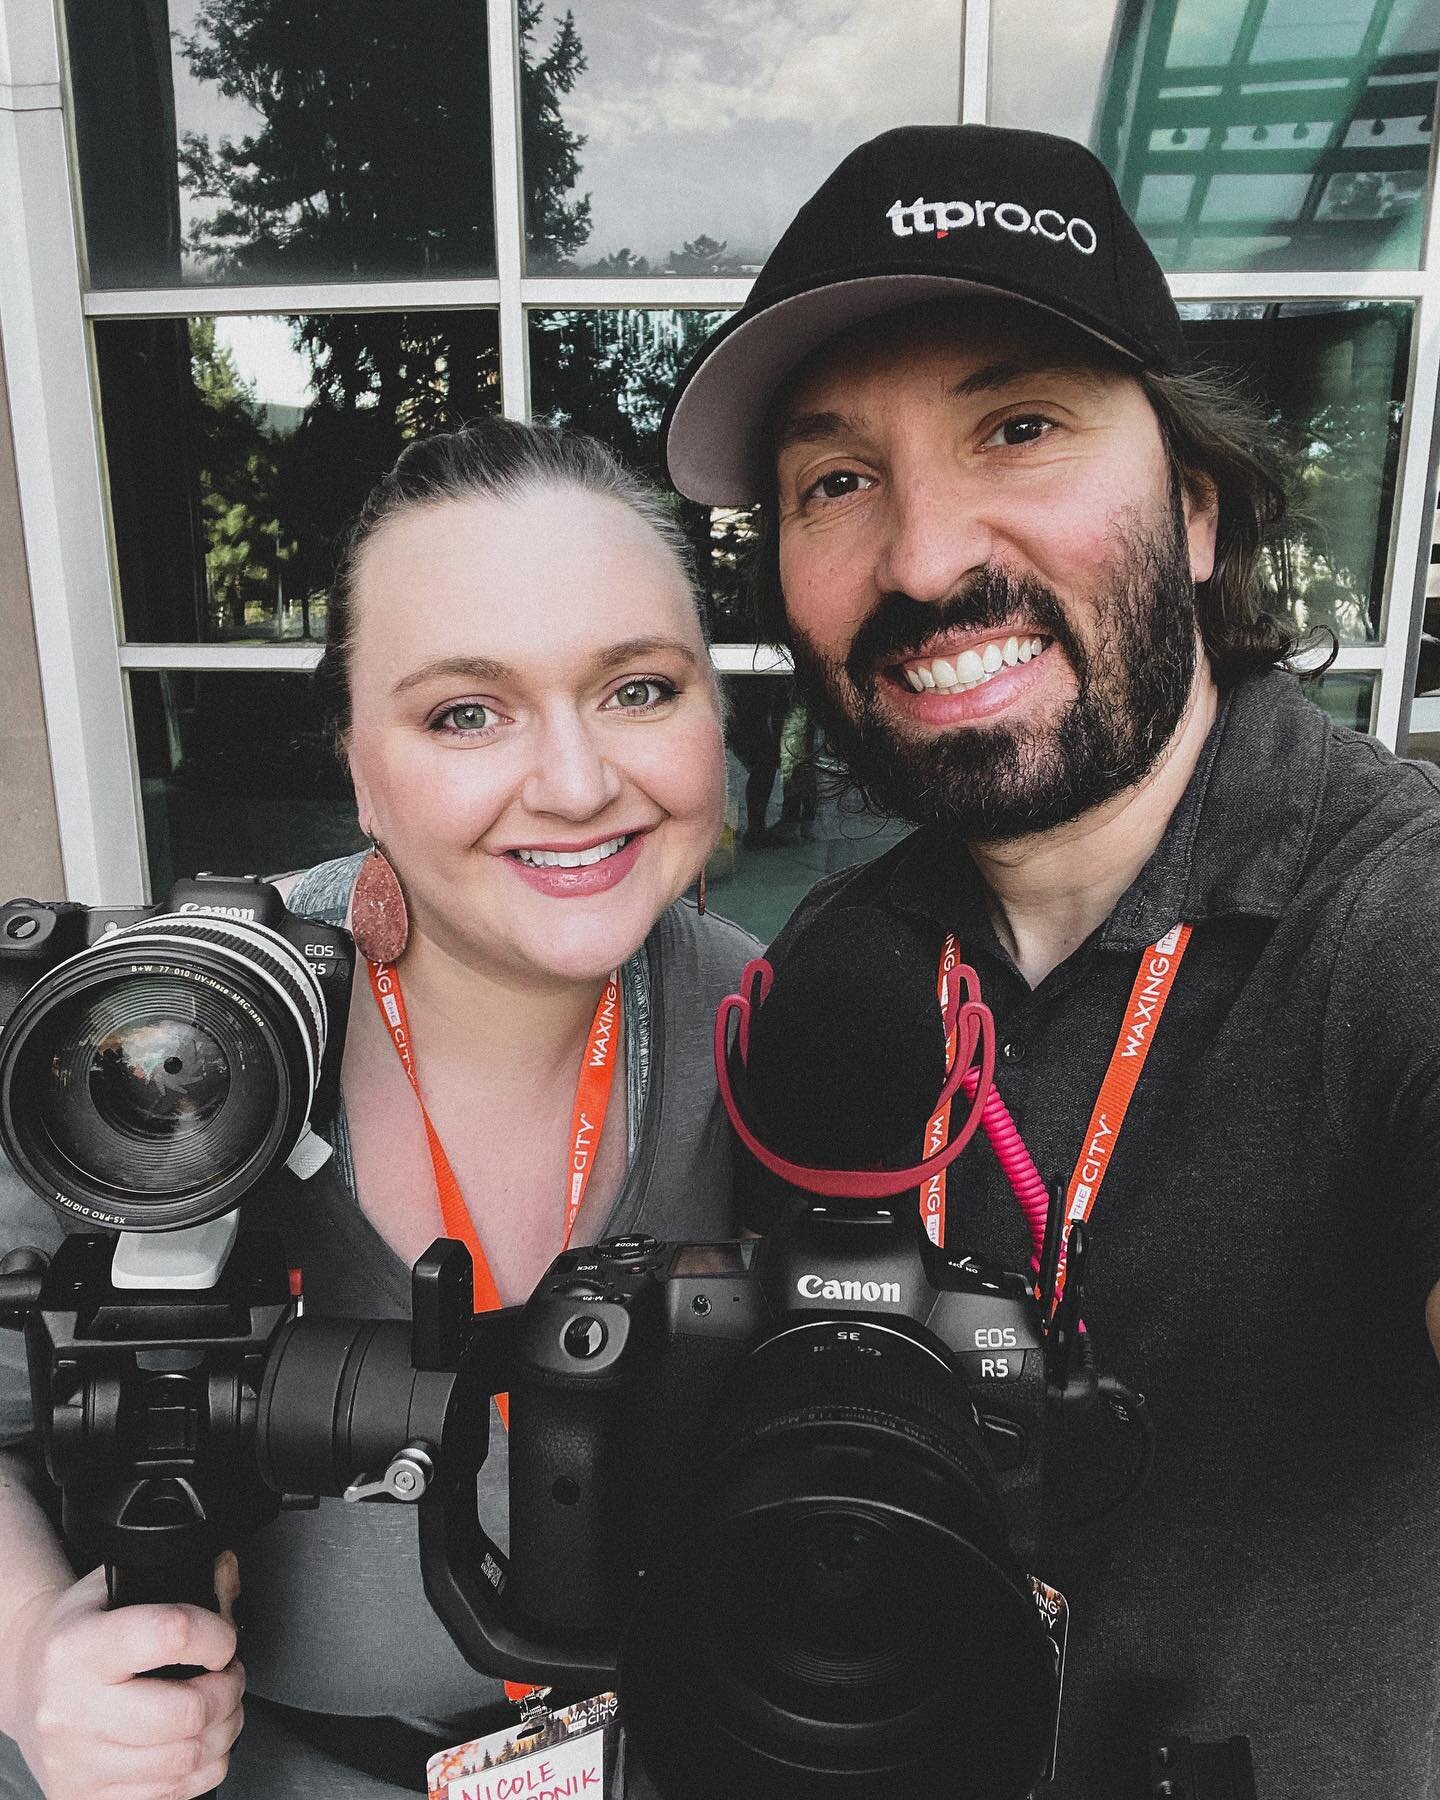 Luckily, getting to Denver was the most difficult part. Our shoot for @waxingthecity is as smooth as can be! 

#TTProCo 🎥
#TTProCoOnTheGoGo 

#videoproduction #videoshoot 
#bts #behindthescenes #videographer #videography #hotelroom #hotelroomshoot #